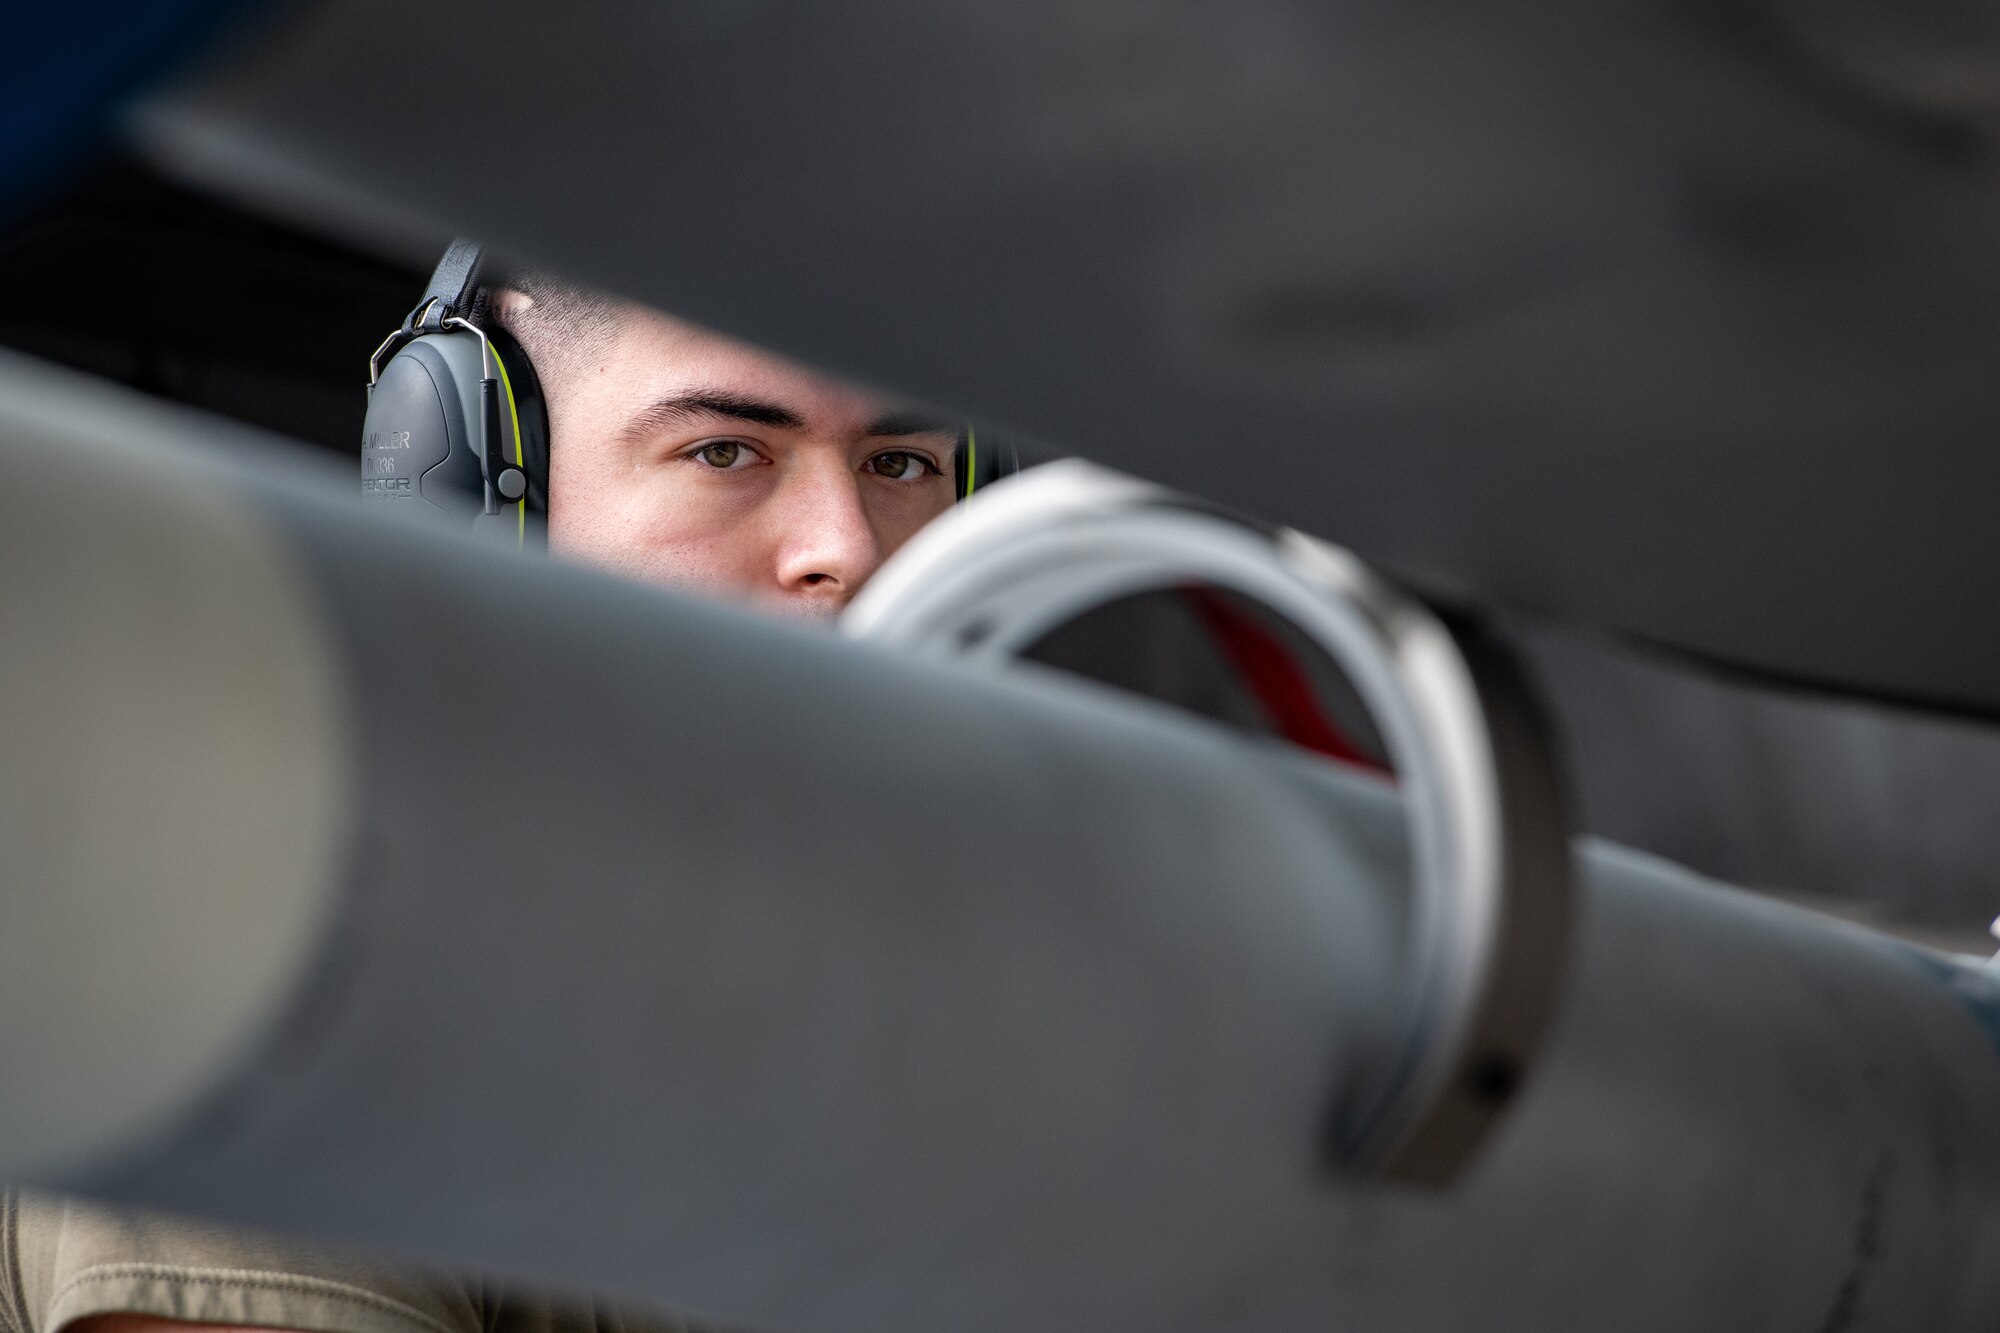 An Airman from the 18th Aircraft Maintenance Squadron loads an AIM-120 Advanced Medium Range Air-to-Air Missile onto an F-15C Eagle during a weapons load competition at Kadena Air Base, Japan, Nov. 17, 2023. Kadena’s maintenance Airmen are entrusted with the task of ensuring Kadena’s fleet of more than 100 aircraft are safe and ready to project airpower across the Indo-Pacific region. (U.S. Air Force Photo by Lt. Col. Raymond Geoffroy)